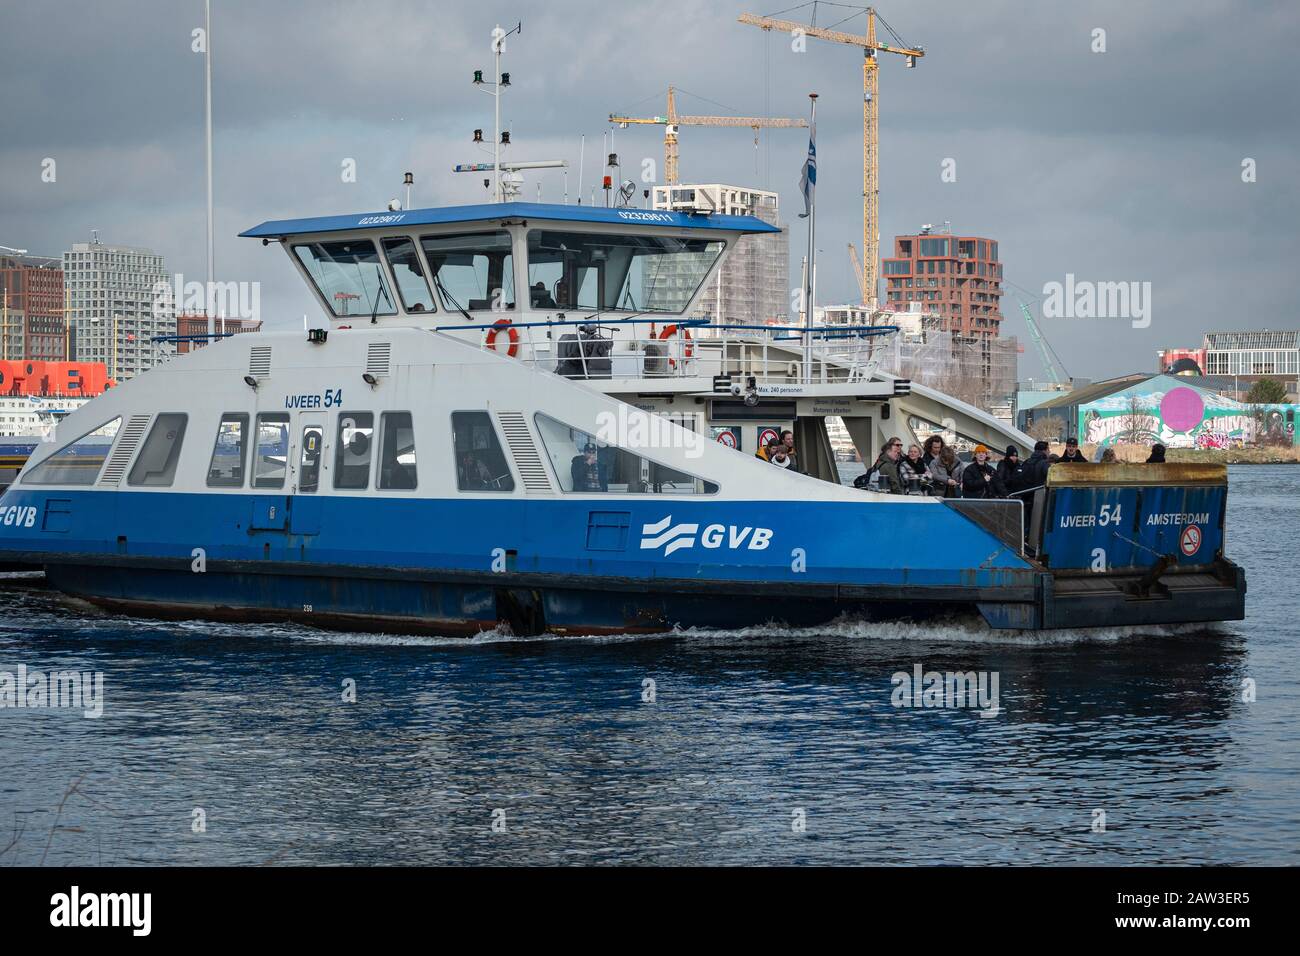 Ferry carrying passengers between Amsterdam and Amsterdam Noord (North). Stock Photo